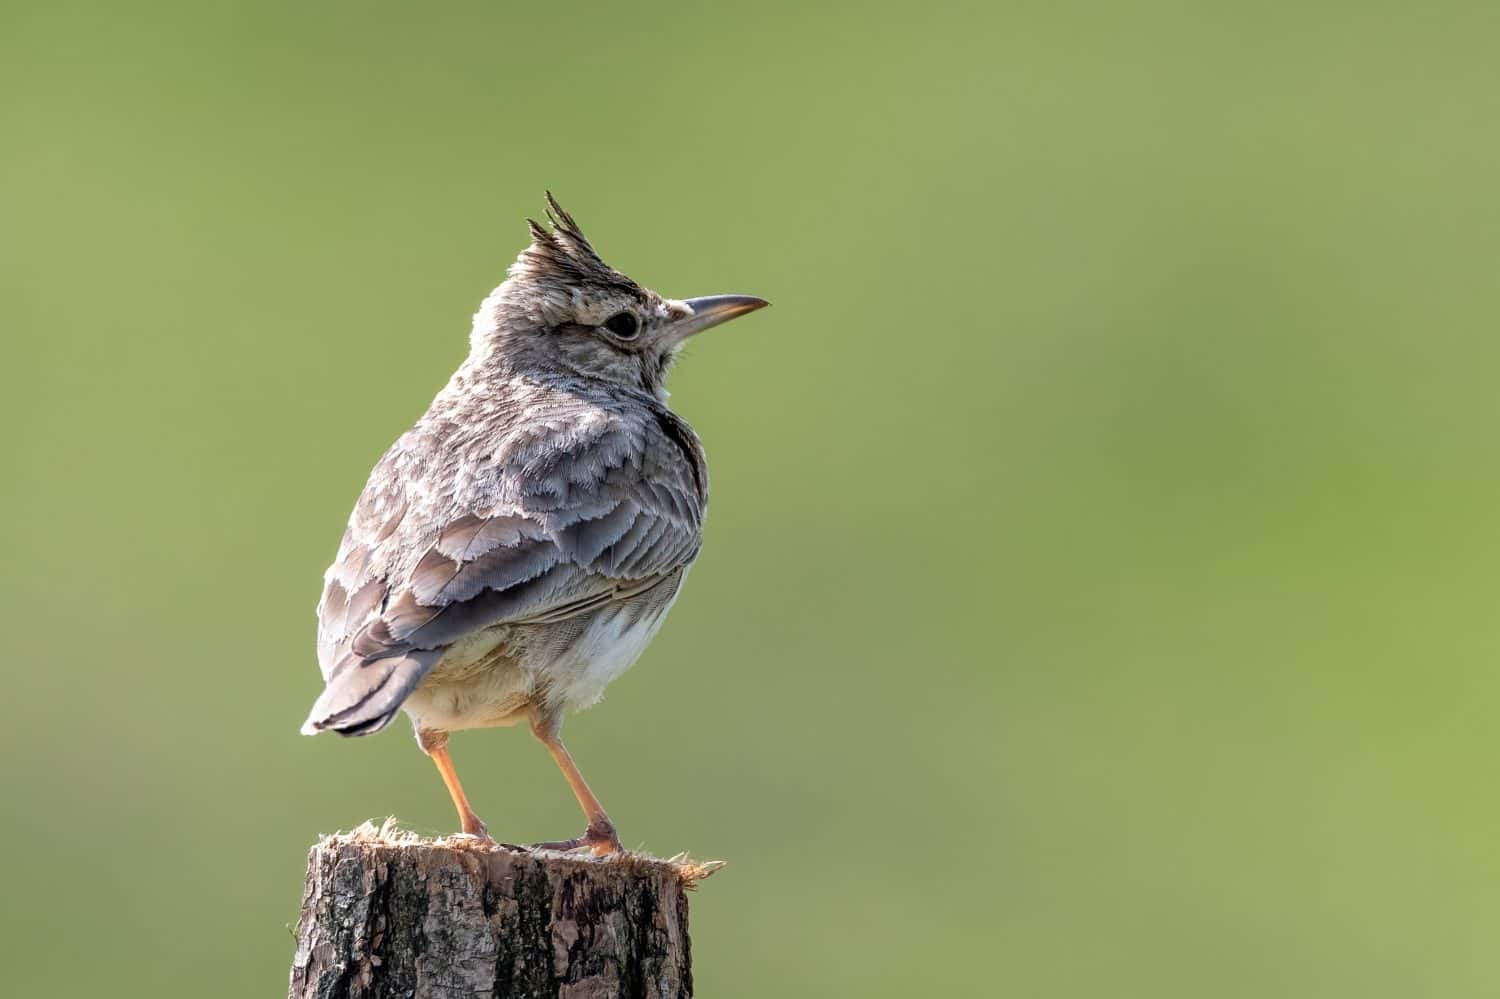 Crested lark standing on stake